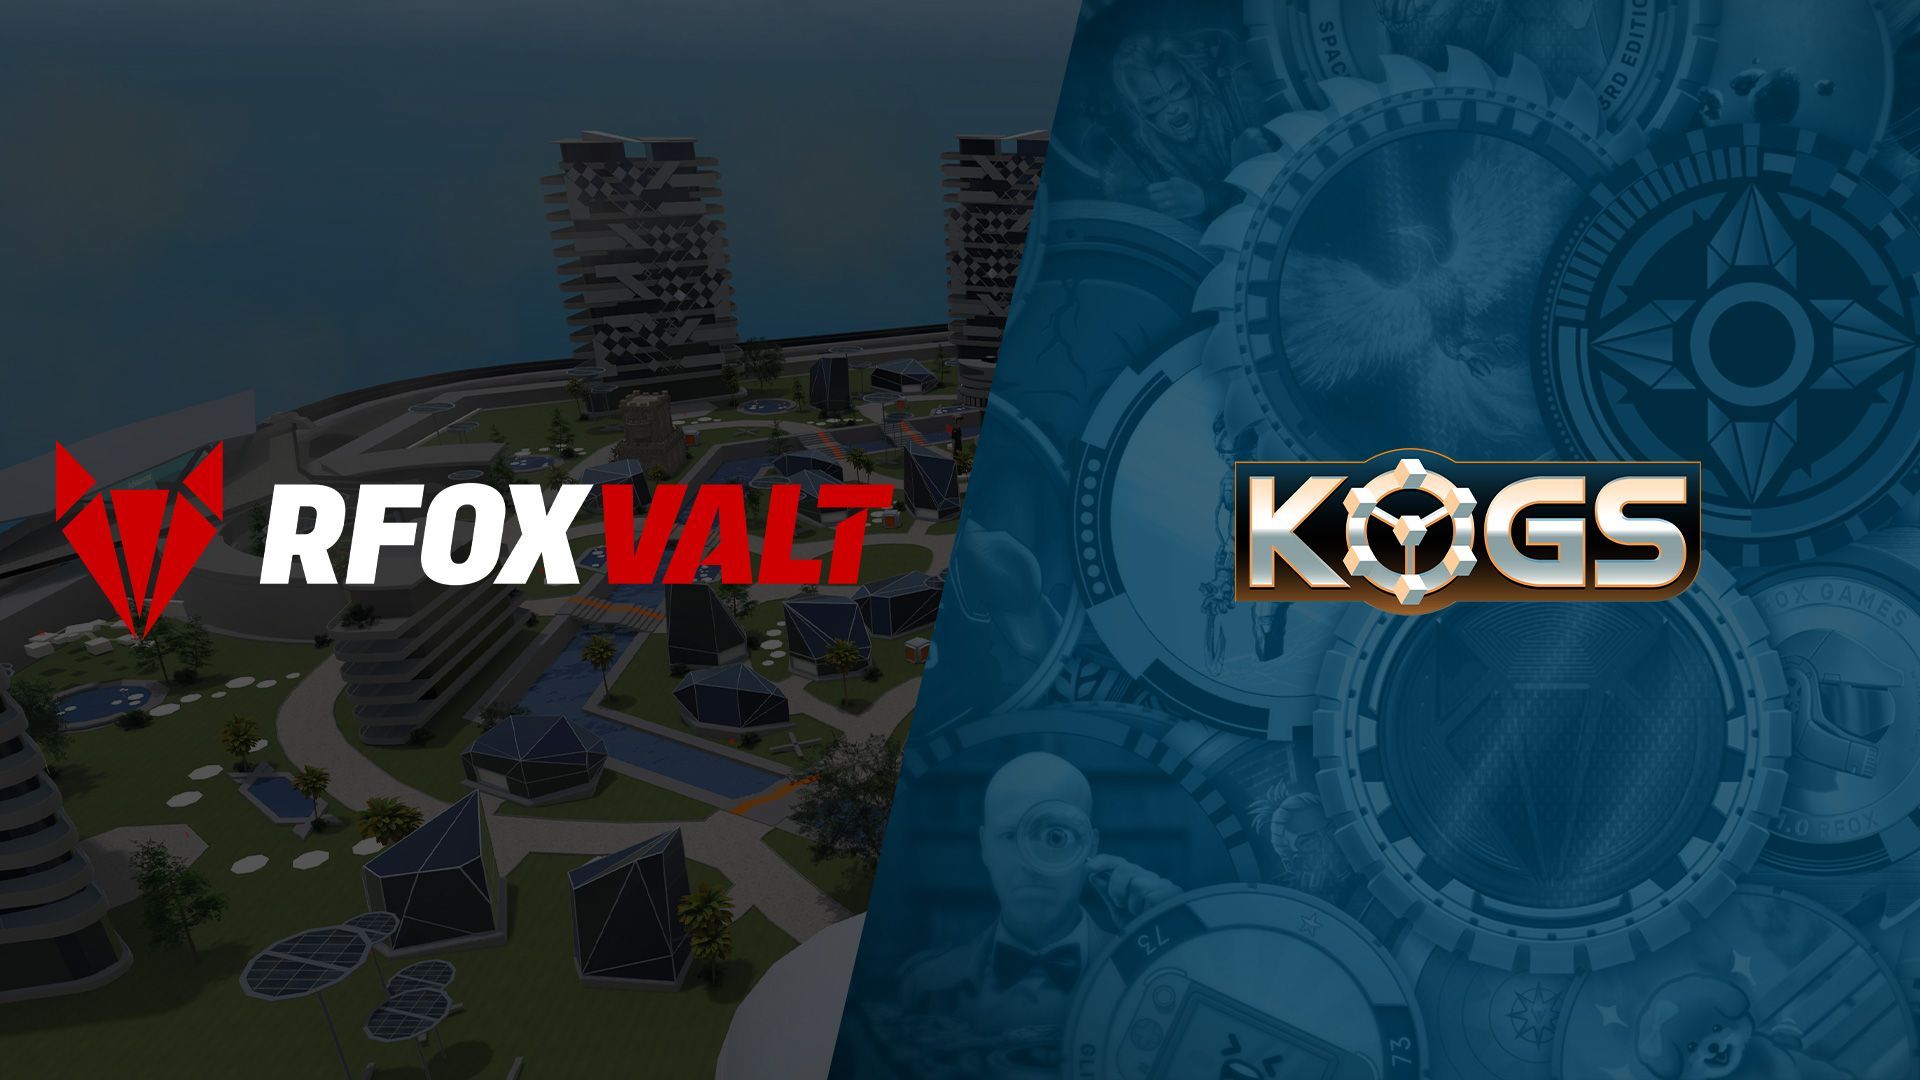 Two logos named RFOX VALT in a metaverse background and KOGs in a slammers background